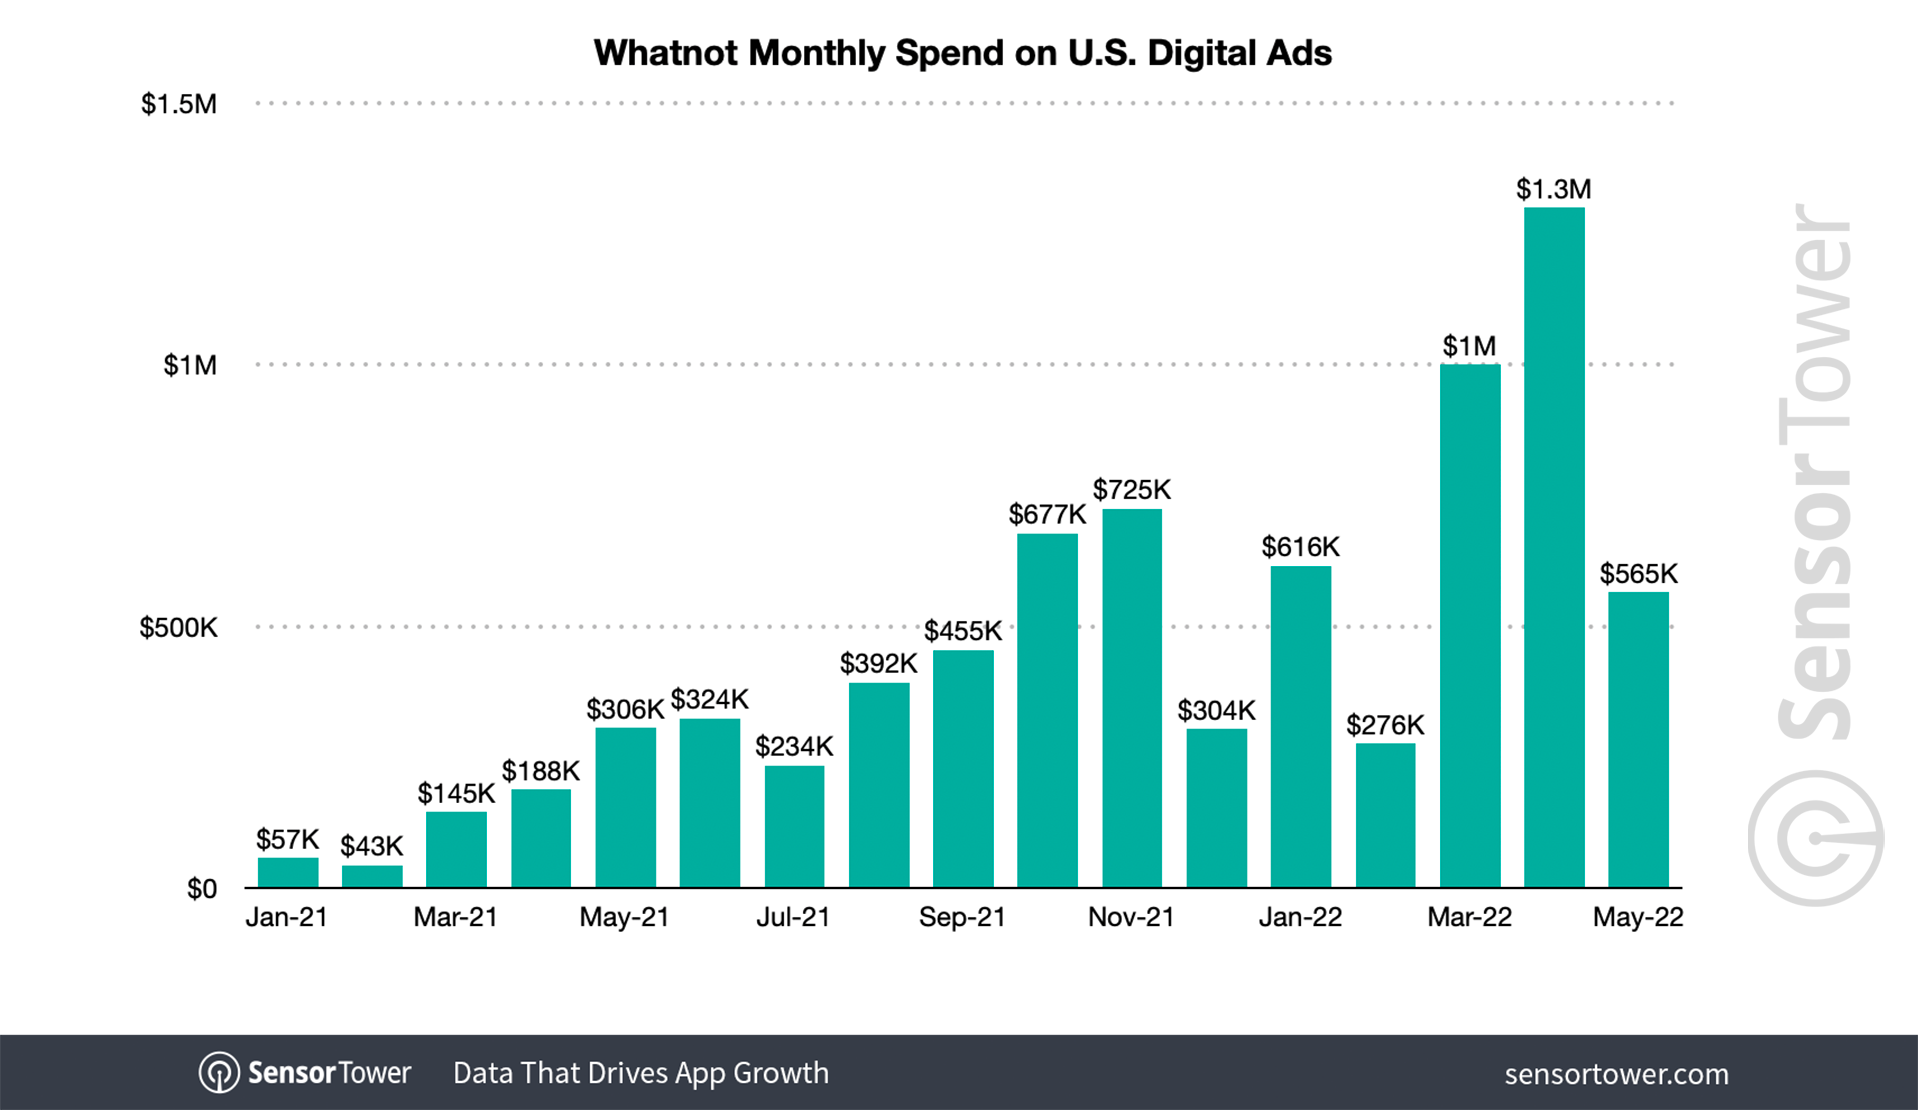 Whatnot monthly ad spend Jan. 2021 through May 2022